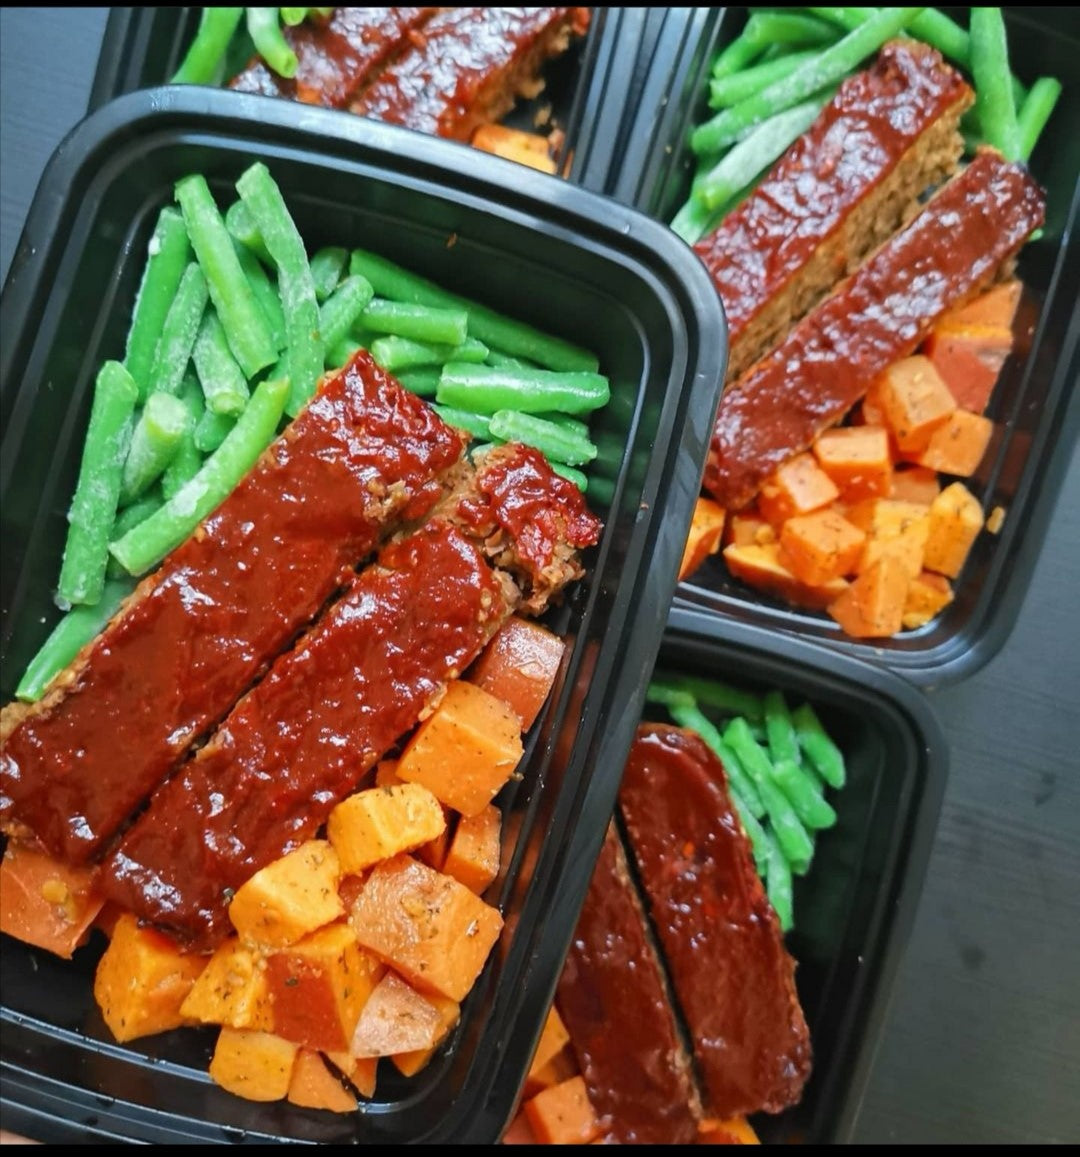 Ready-made healthy meals, including Lentil Loaf & Roasted Sweet Potato, sweet potatoes and green beans in plastic containers (Fierce Fuel, Squamish).